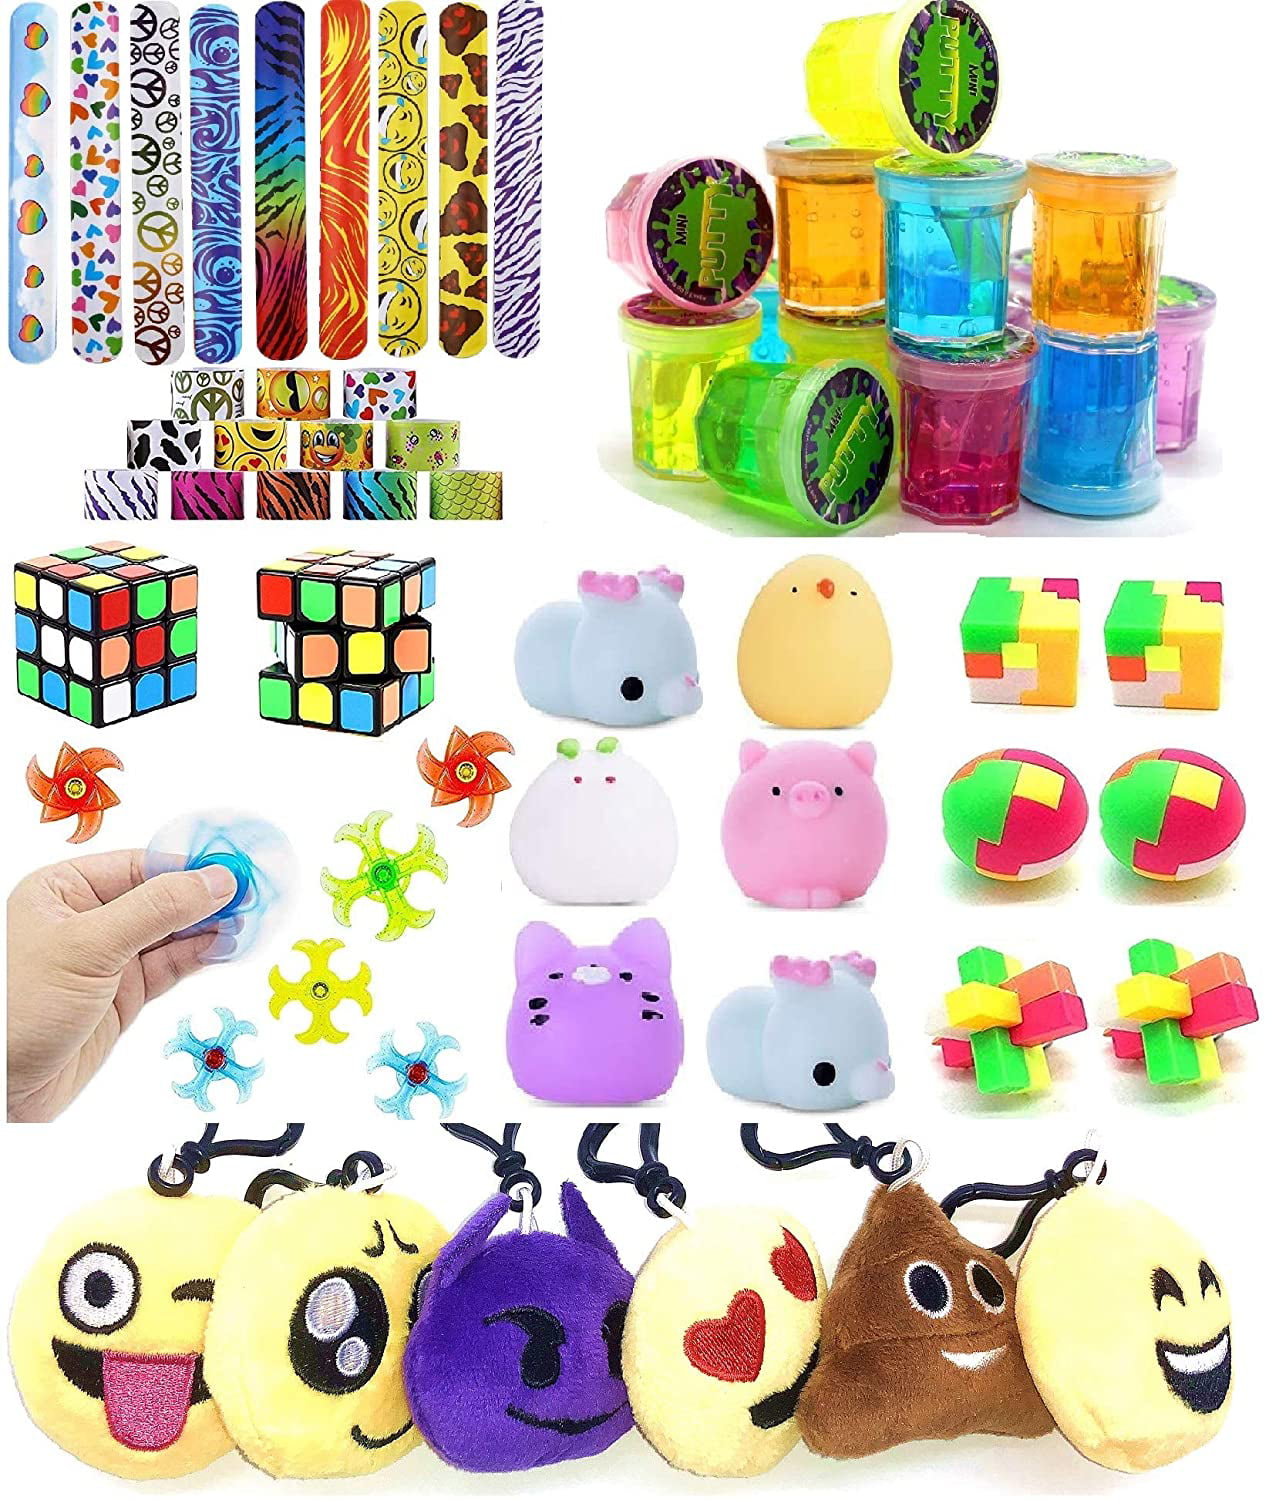 CHARACTER BUBBLES Boys/Girls Party Loot Bag Fillers Toys Gifts Pots Tubs Maze 